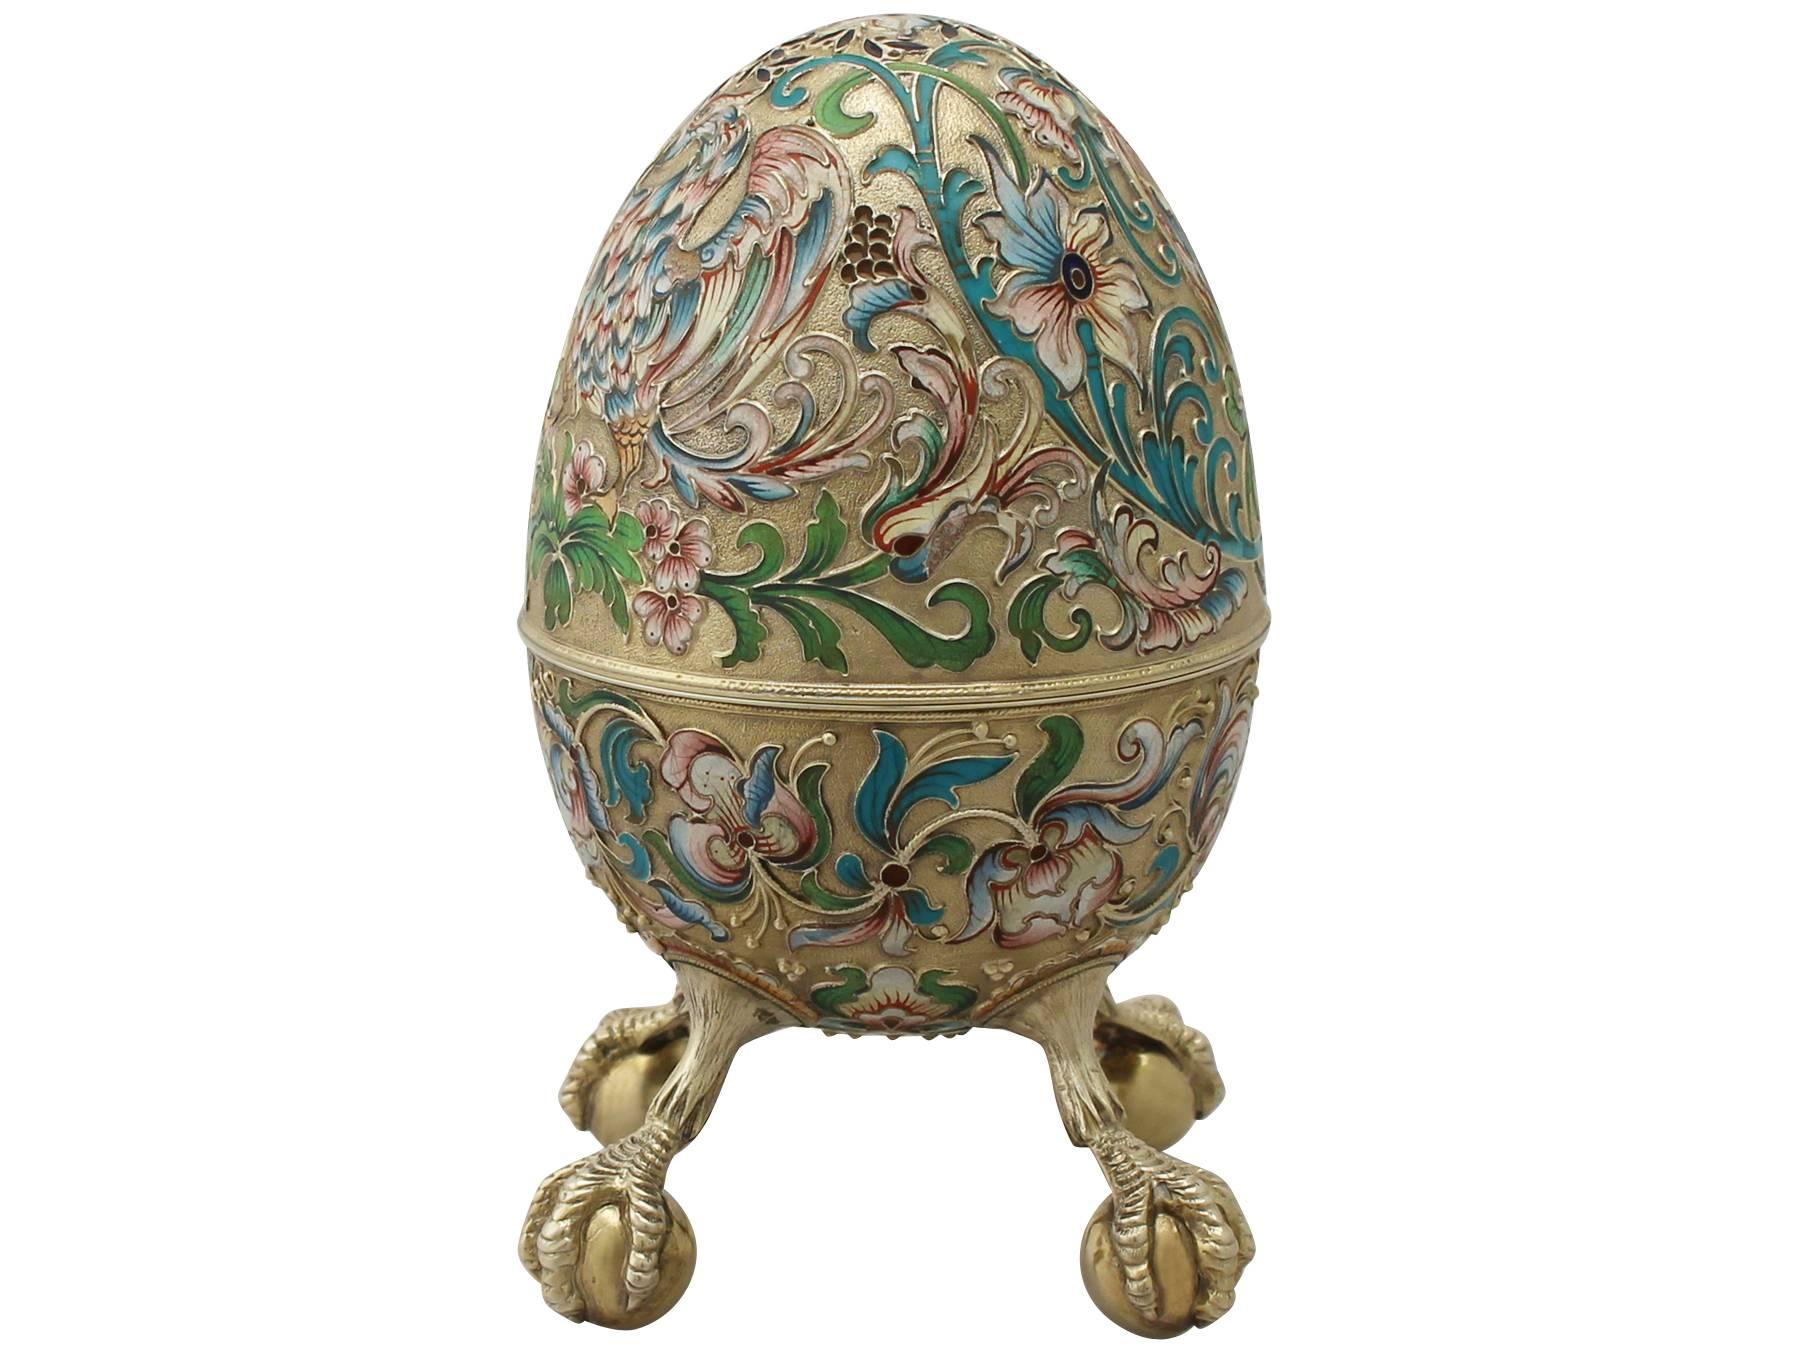 A magnificent, fine and impressive, composite pair of antique Russian silver gilt polychrome cloisonné enamel eggs; an addition to our ornamental silverware collection.

These magnificent antique Russian silver gilt boxes have an ovoid egg shaped